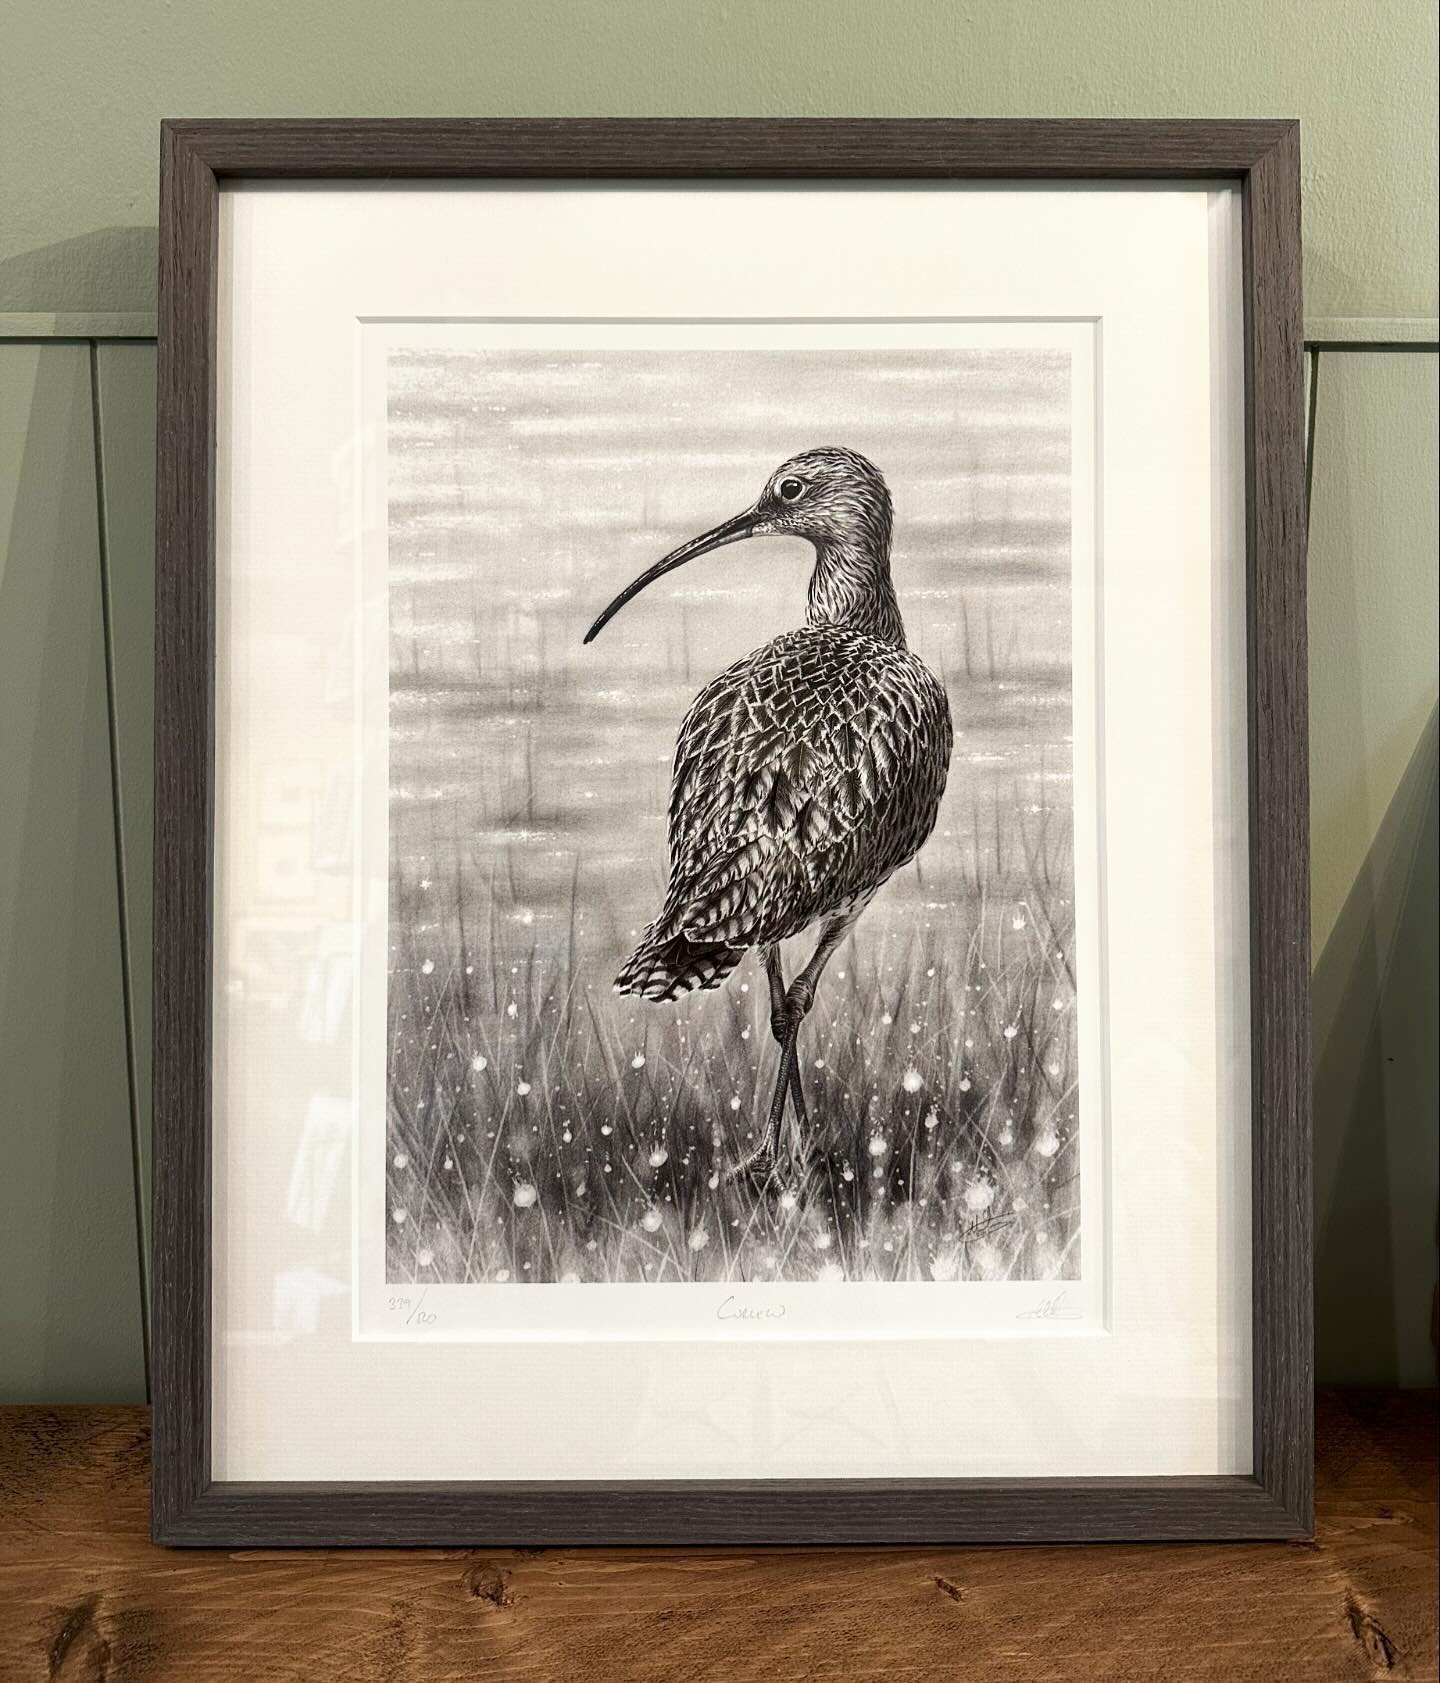 &lsquo;Curlew&rsquo; framed in a charcoal grey frame from @larsonjuhluk. I don&rsquo;t think I&rsquo;ve used this frame for the curlew before but it works well.